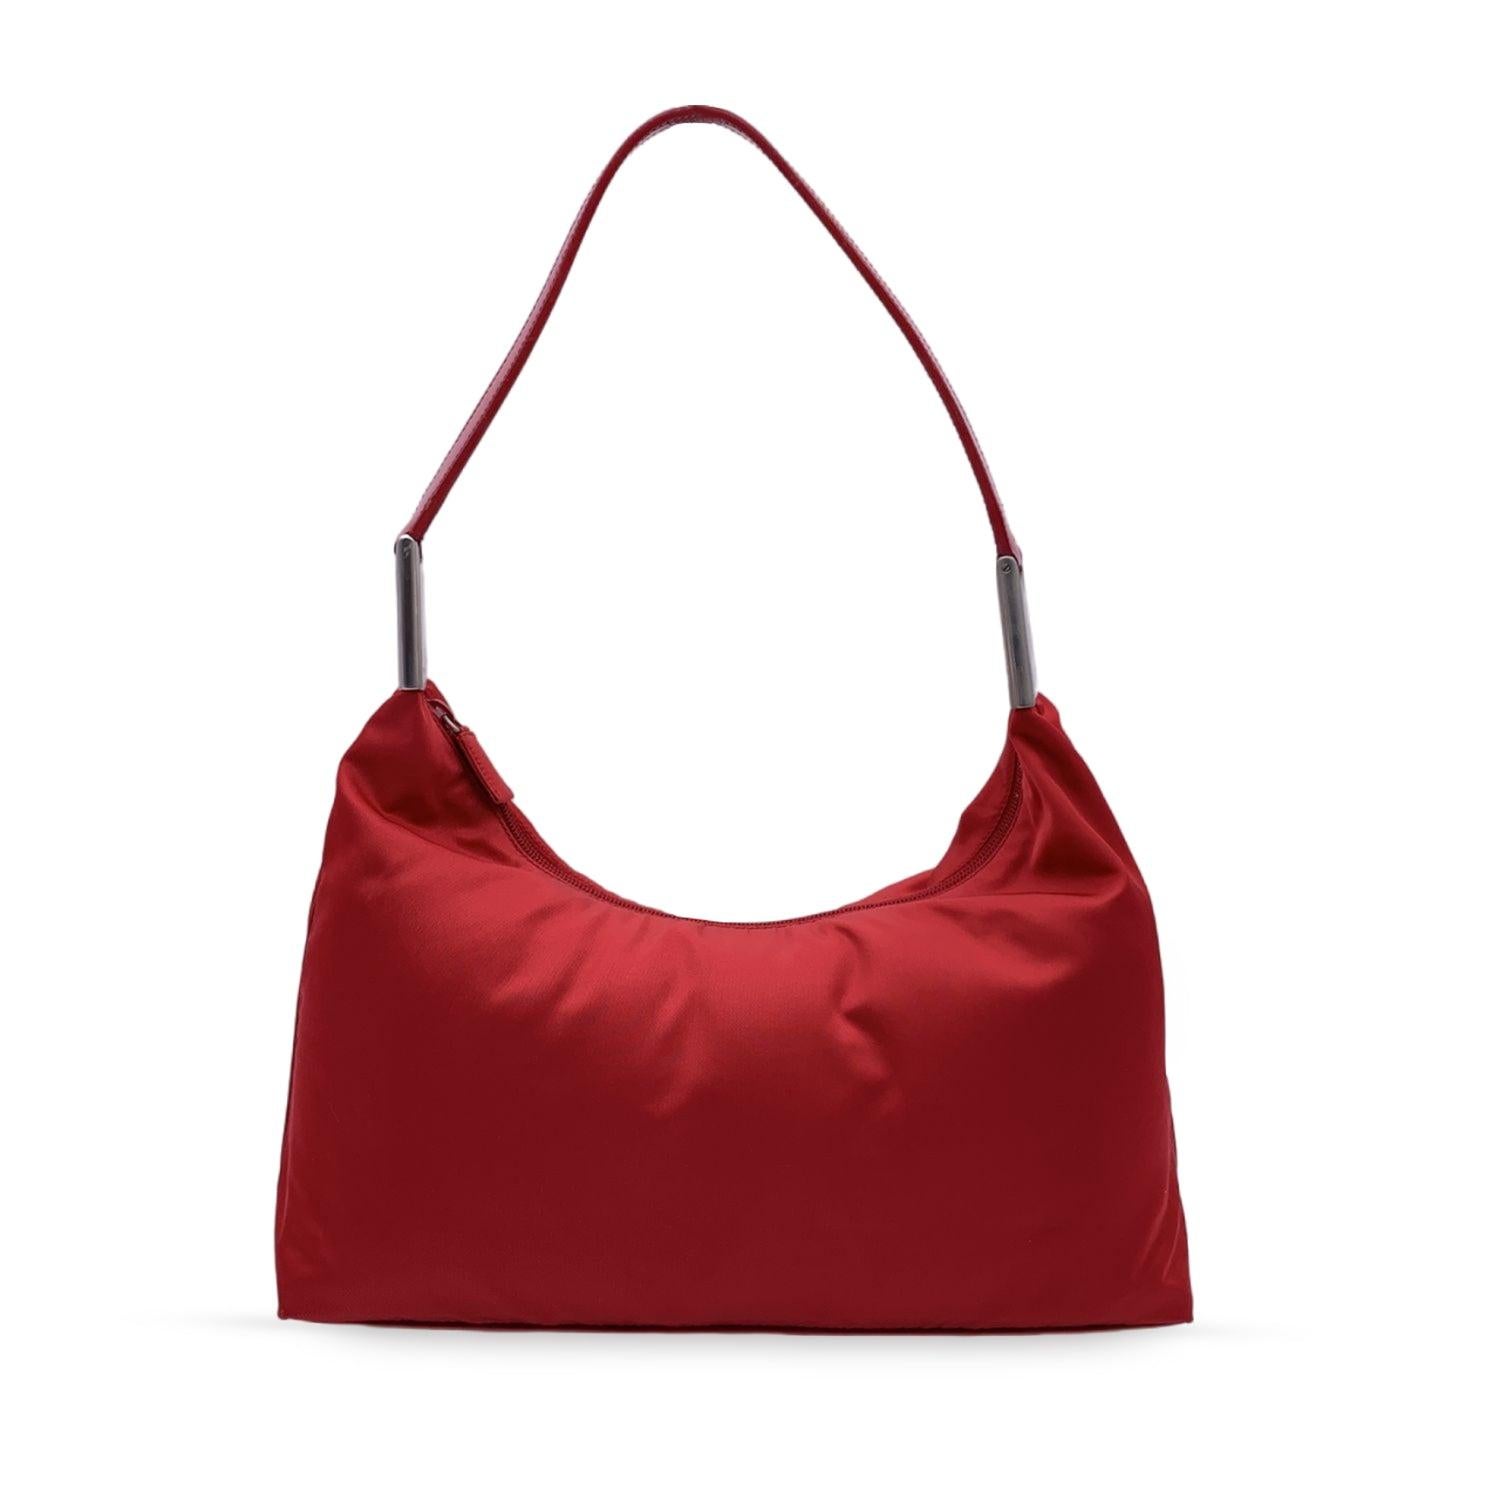 PRADA Hobo Shoulder Bag. Crafted in red tessuto nylon canvas with genuine leather shoulder strap. Silver metal hardware. Upper zipper closure. Red signature canvas lining. 1 side zip pocket. 'Prada Milano - Made in Italy' tag inside Condition A -